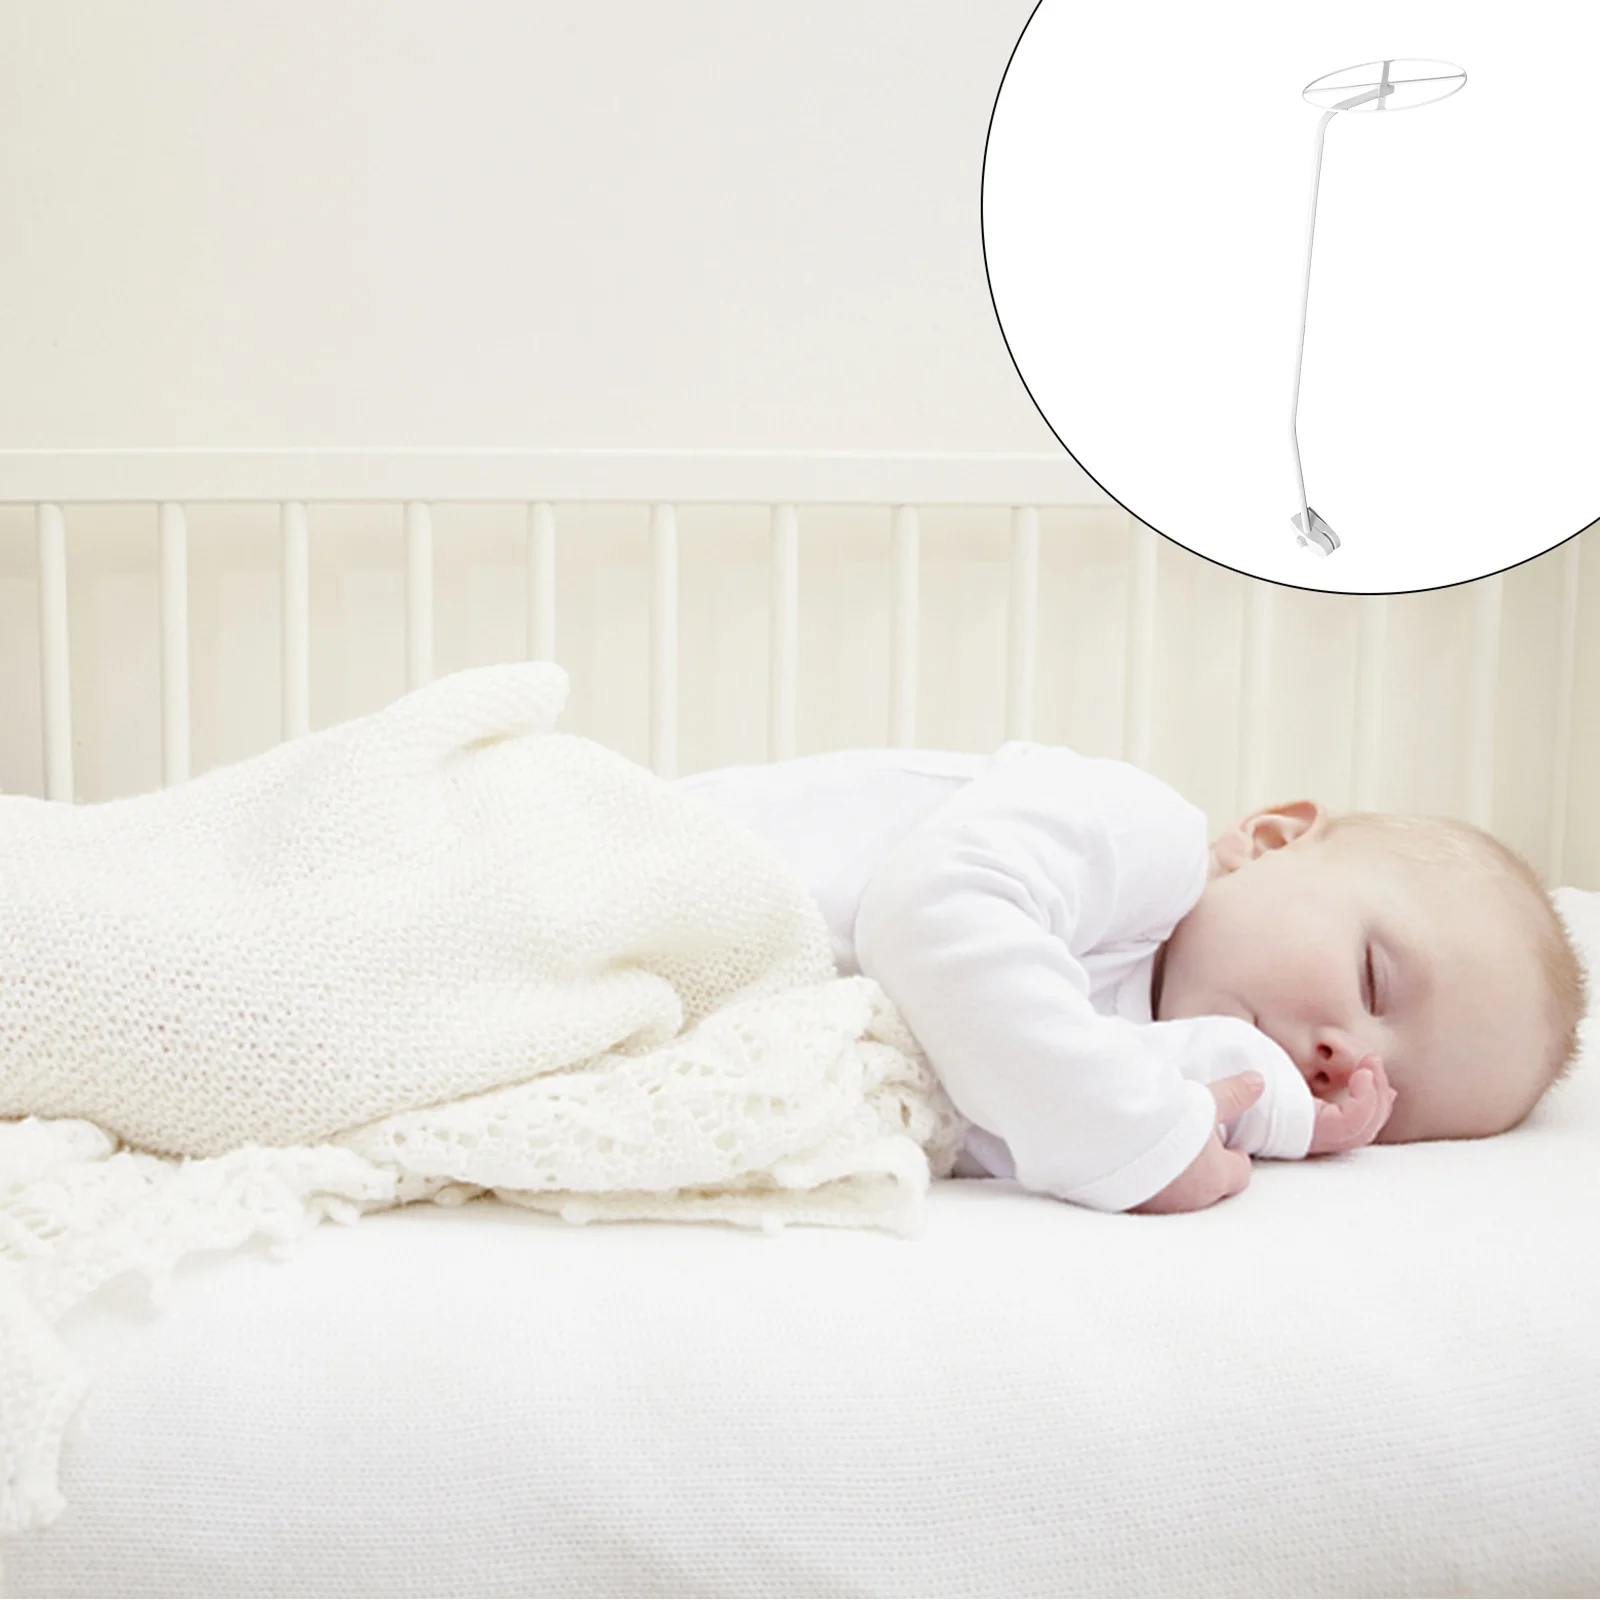 

Adjustable Mosquito Net Stand Holder: Mosquito Net Clip On Bracket Pipe Supporting for Crib Cot Bed Accessory 1 Set